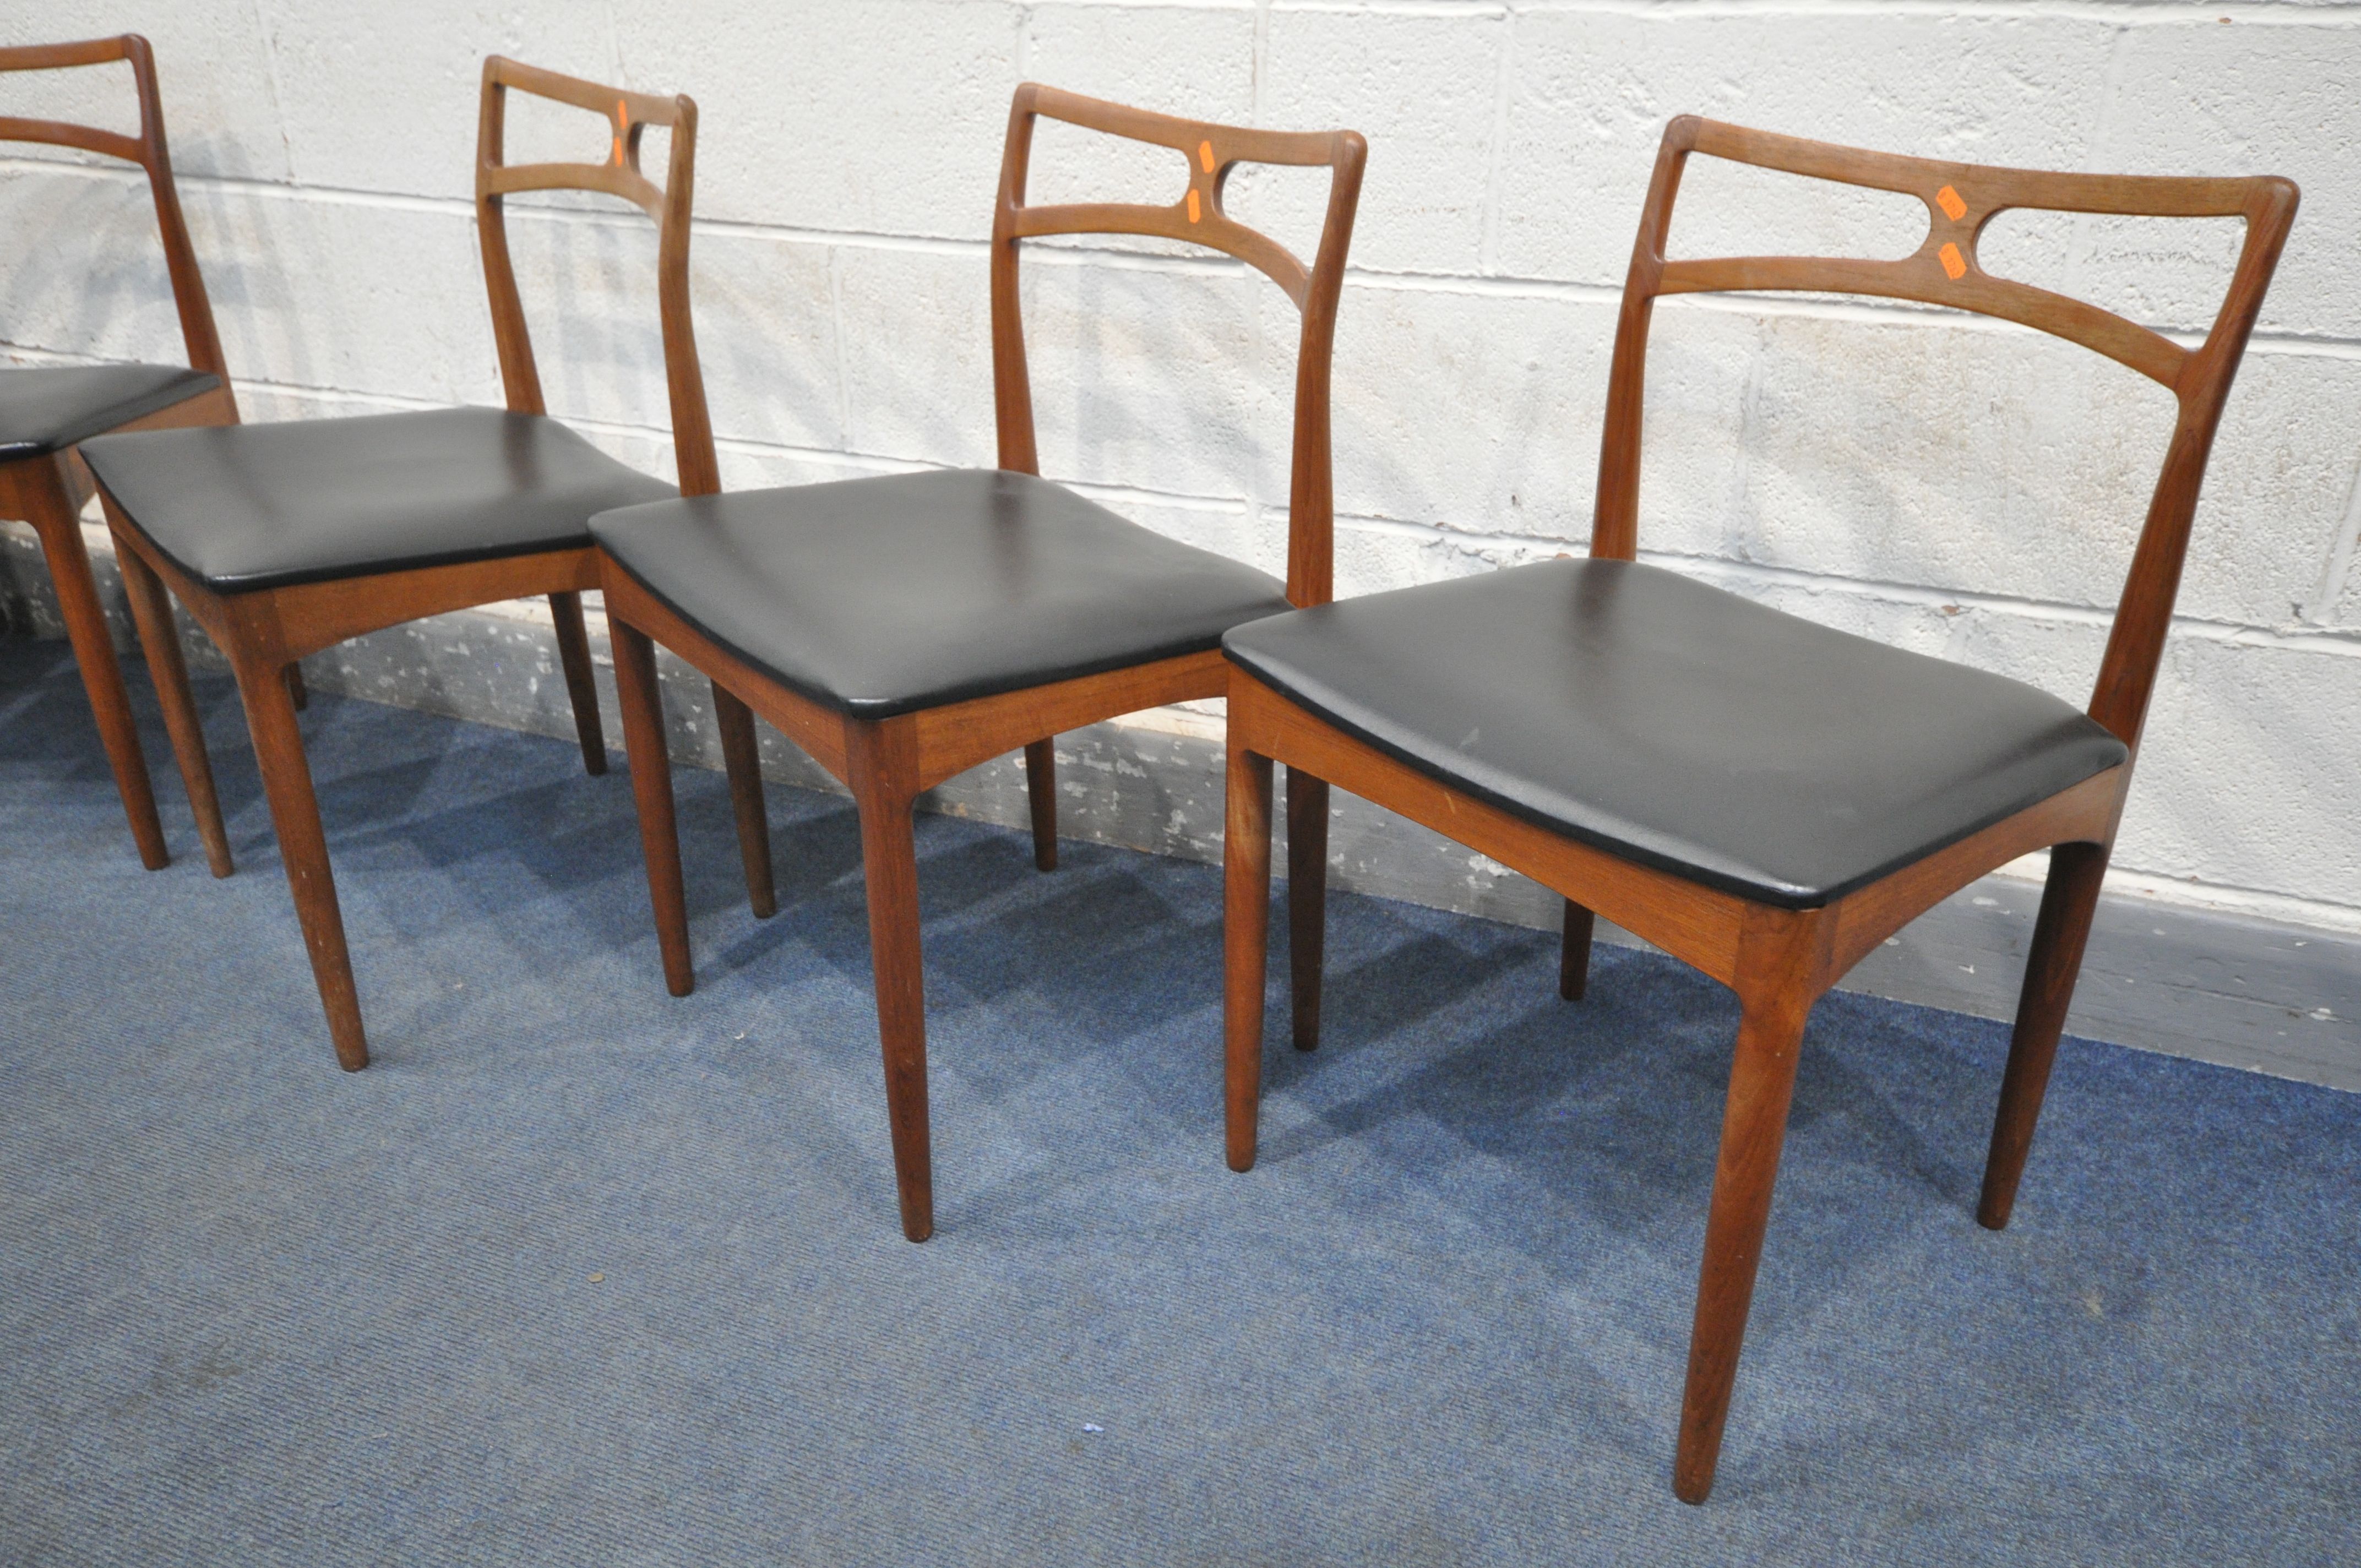 JOHANNES ANDERSEN FOR CHRISTIAN LINNEBERGS MØBELFABRIK, a set of six Danish teak dining chairs, with - Image 2 of 9